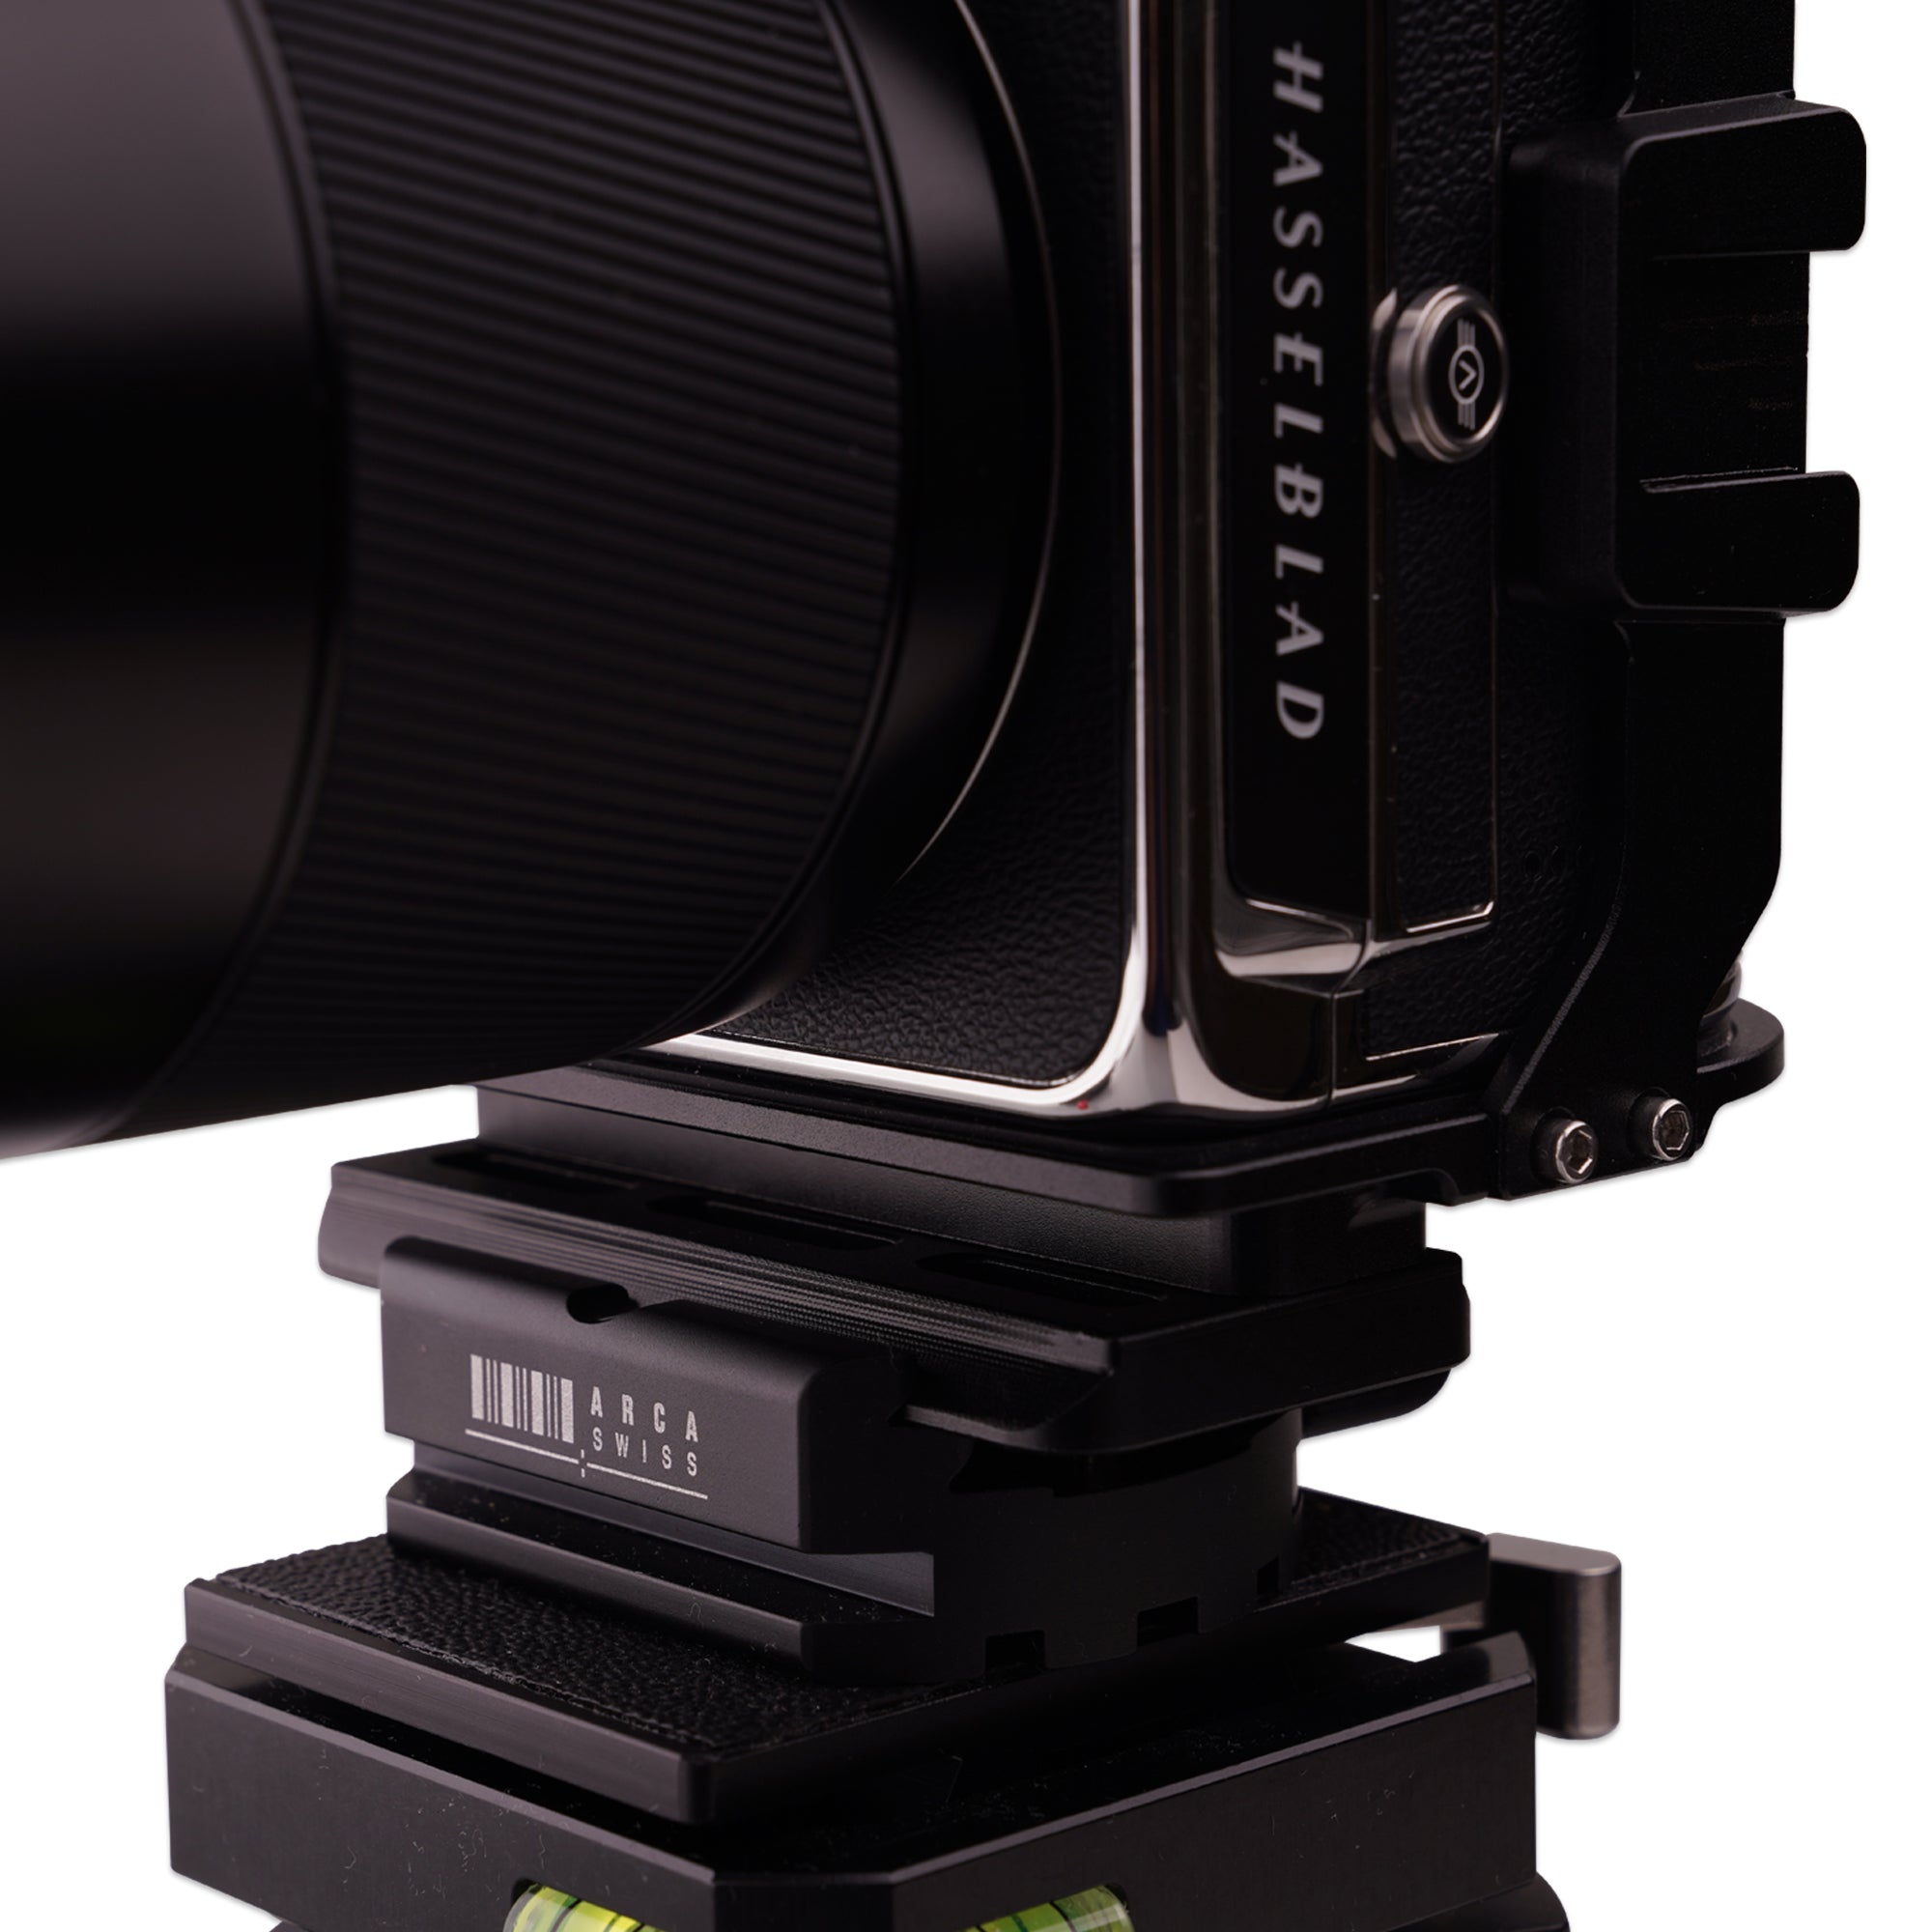 Lanhorse Camera Cage for Hasselblad 907x and Control Grip, Quick switch between landscape and portrait compositions. 2nd Generation..